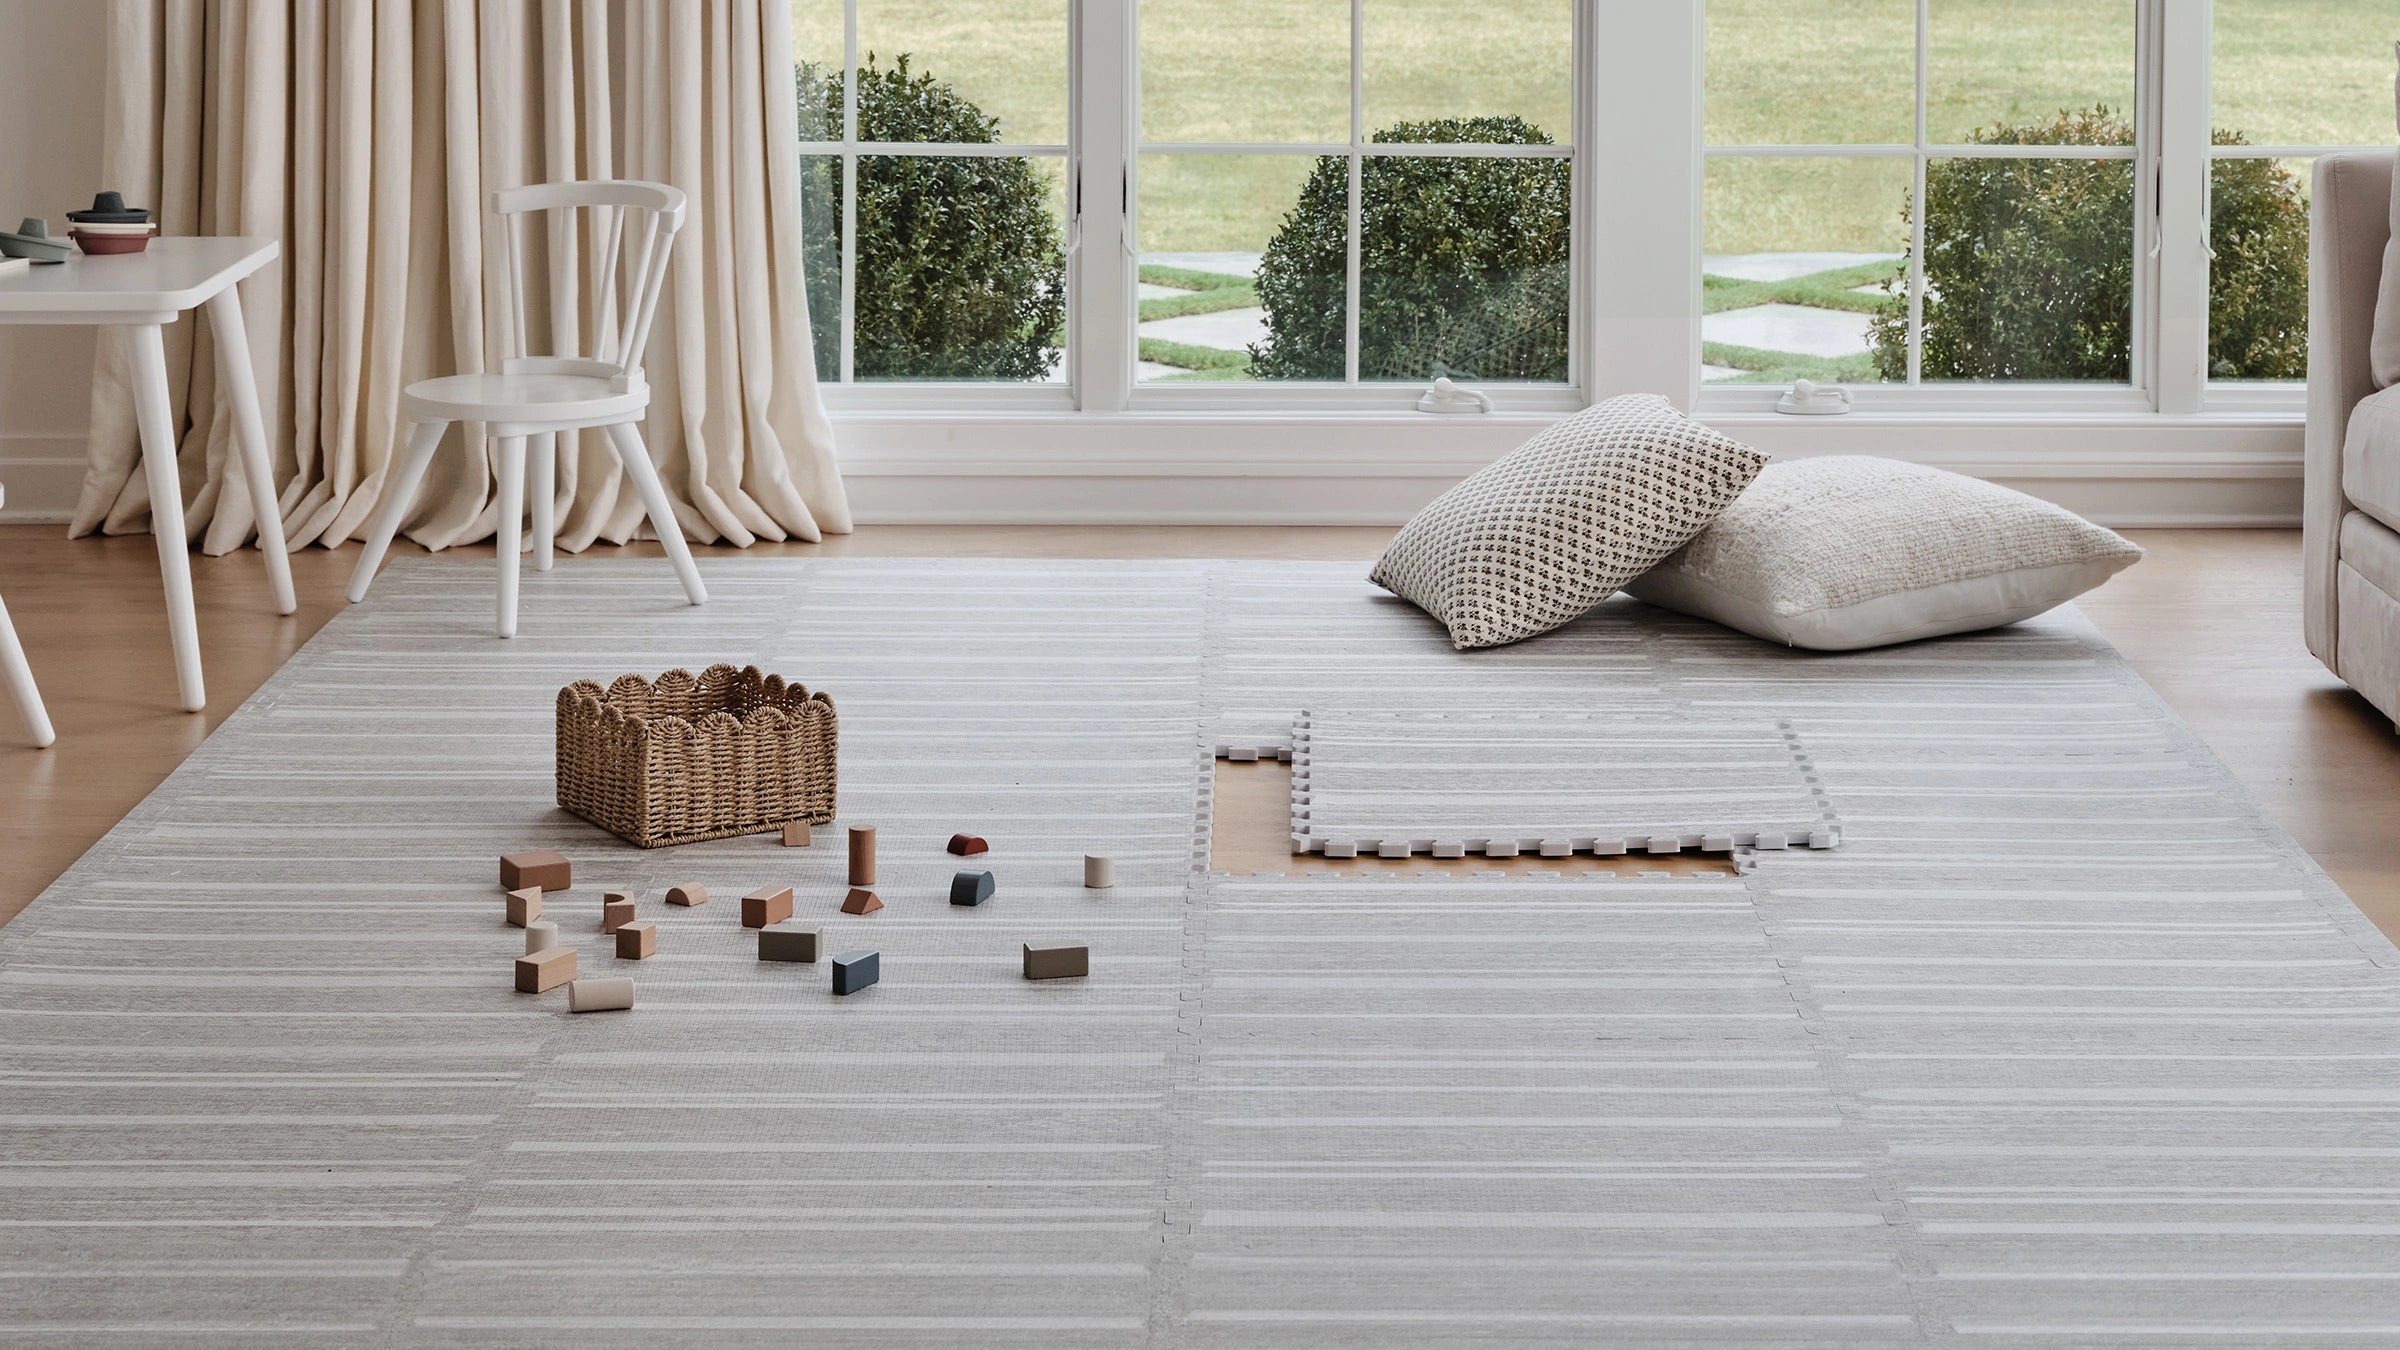 Rowan birch beige and white stripe play mat shown in a living room with basket of blocks and pillows on top of the mat. One tile exposed in the middle